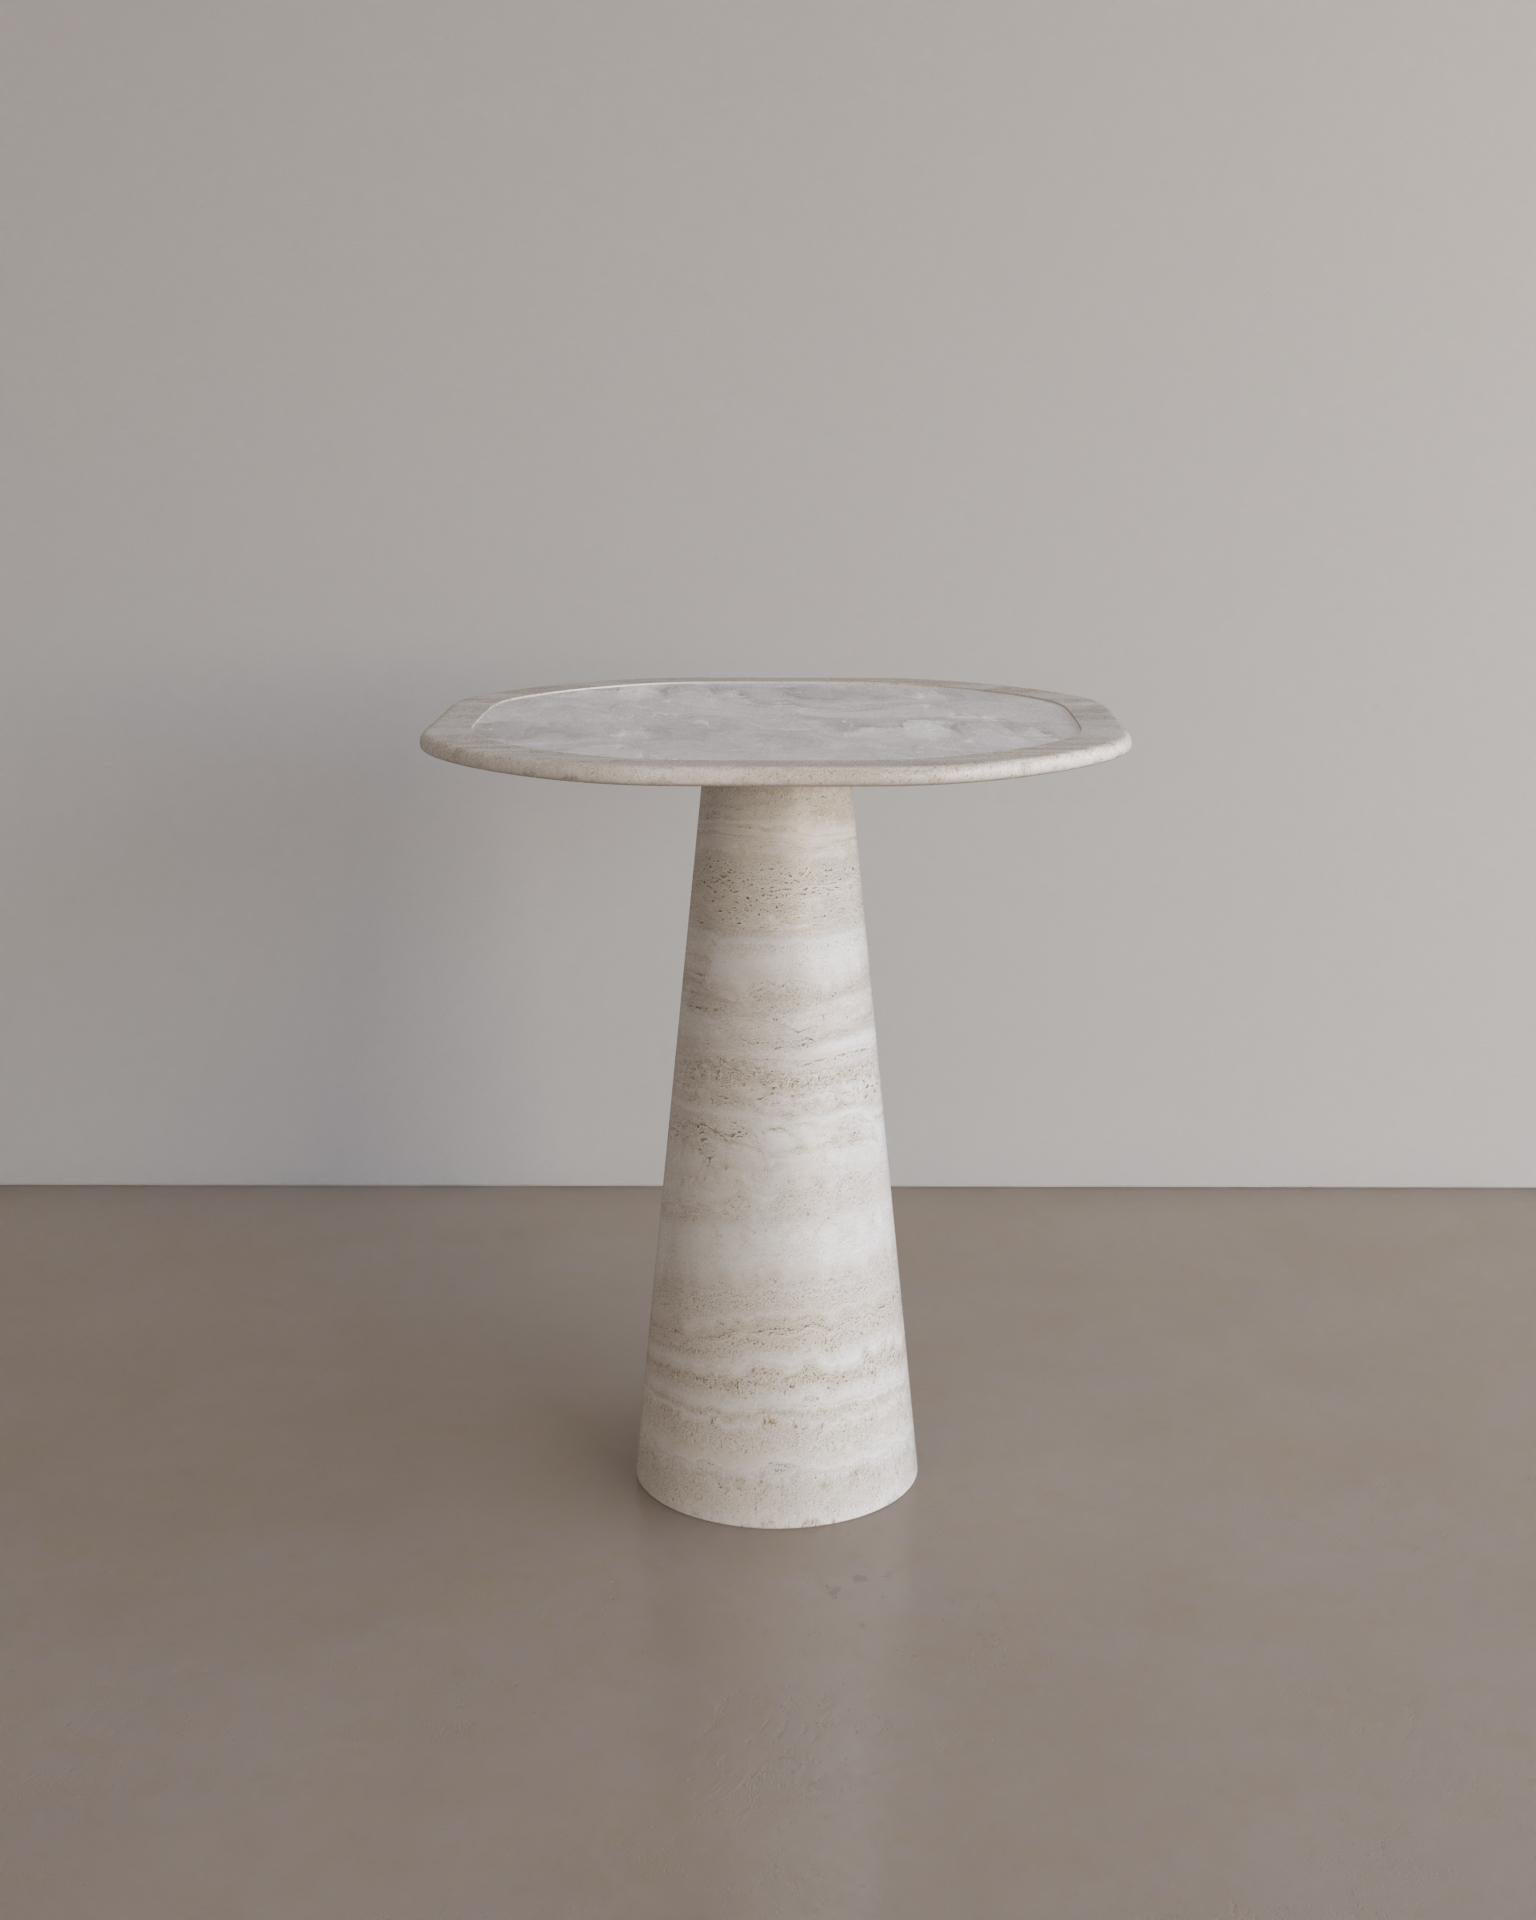 Onyx Eros Foyer Table in Italian Bianco Travertine with a Viola Heart For Sale